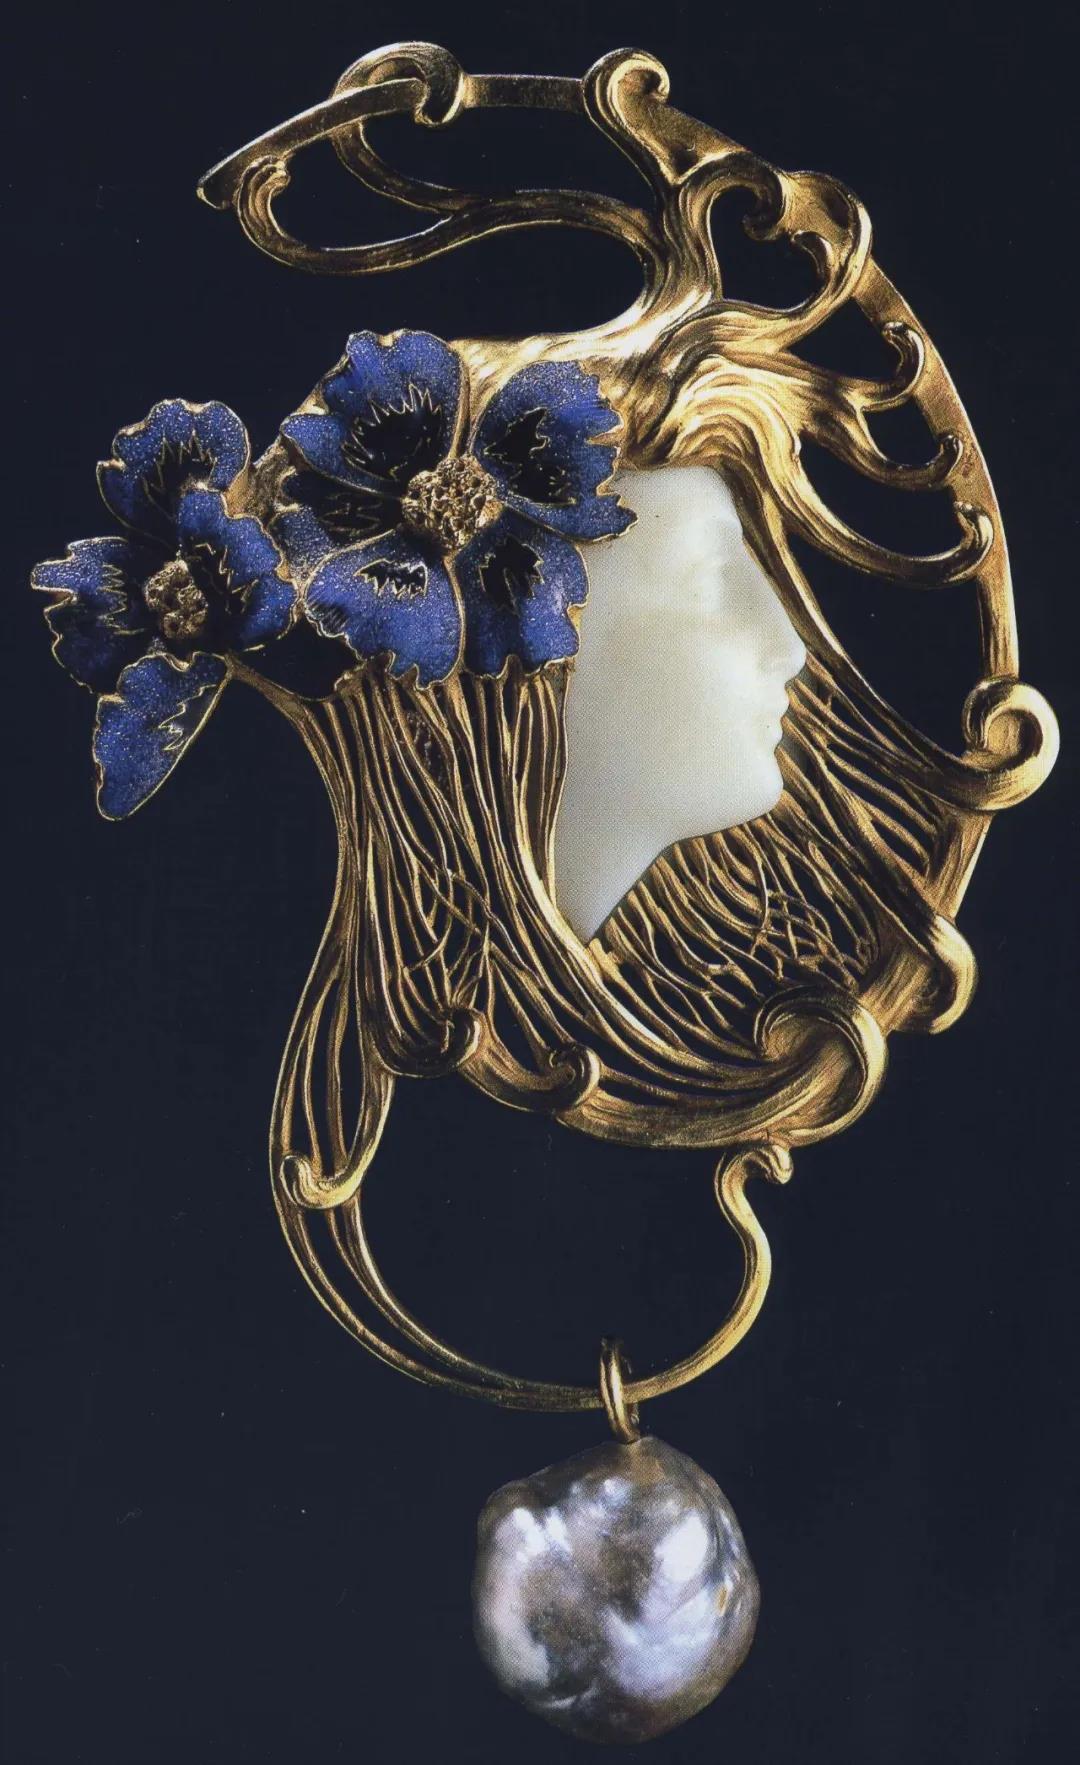 Pendant  Gold, chalcedony, enamel and pearl  René Lalique  1898-1899